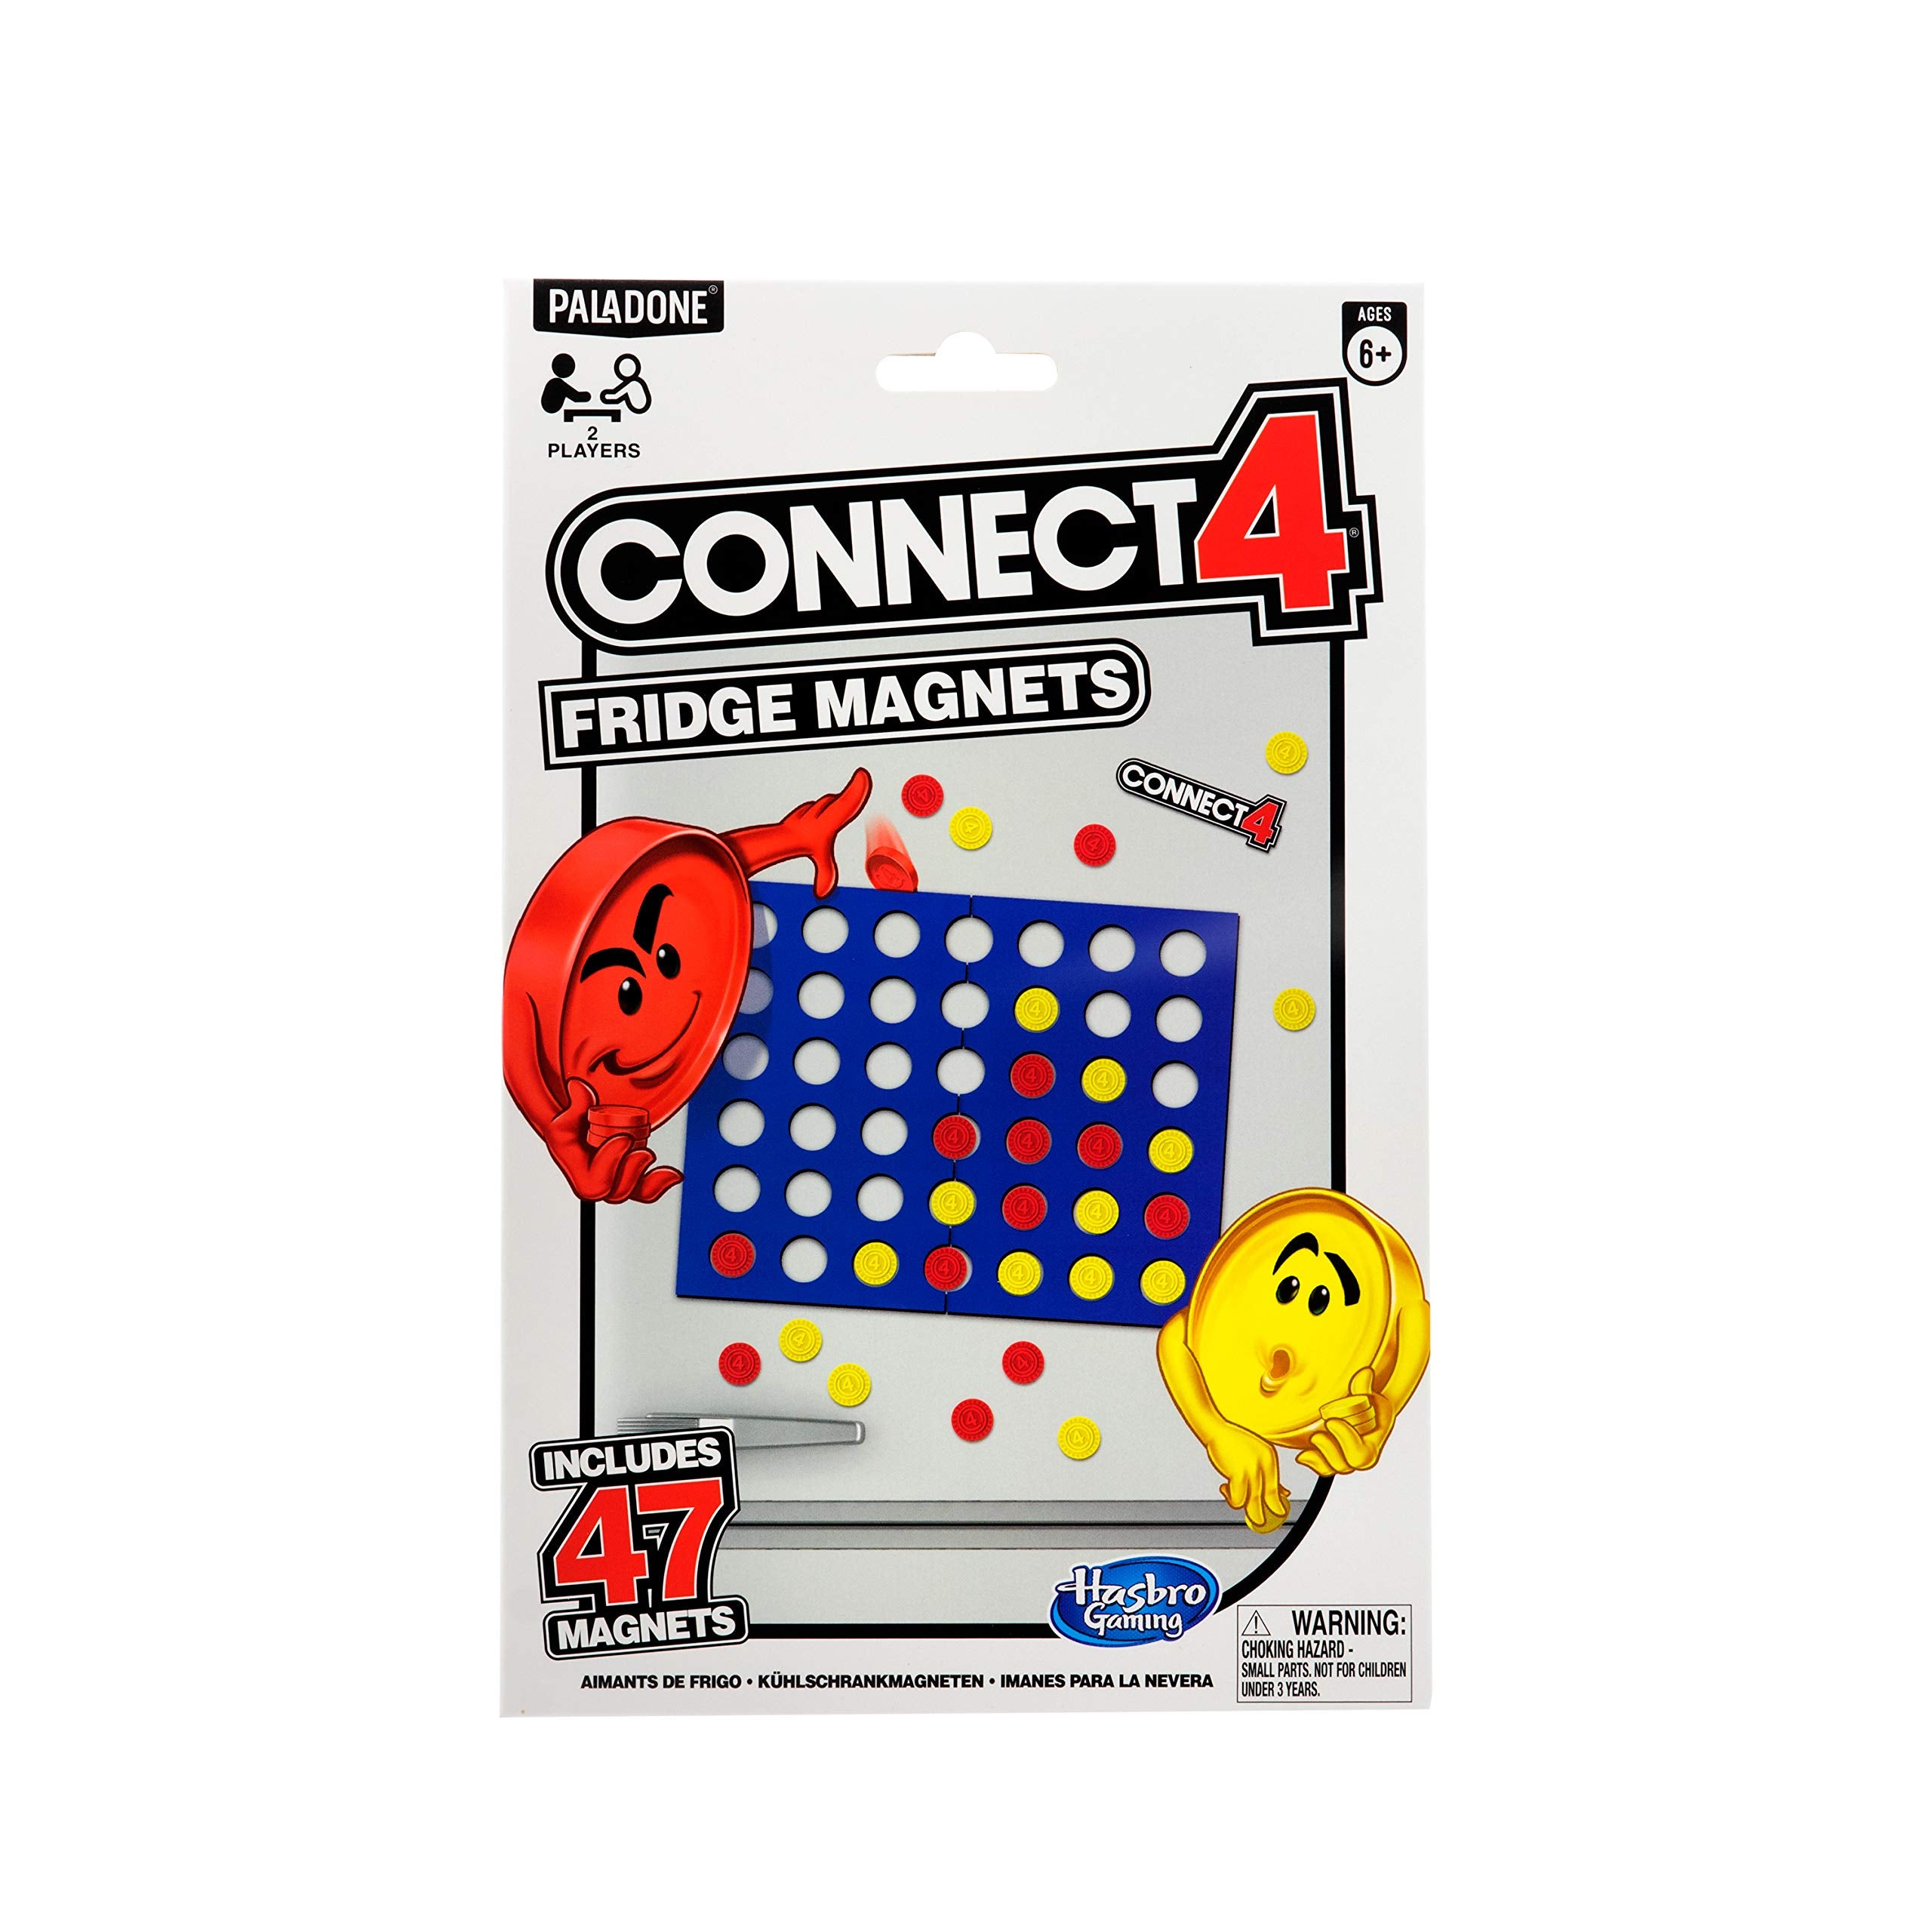 Paladone Connect 4 Fridge Magnet Game, Includes 47 Refrigerator Magnets